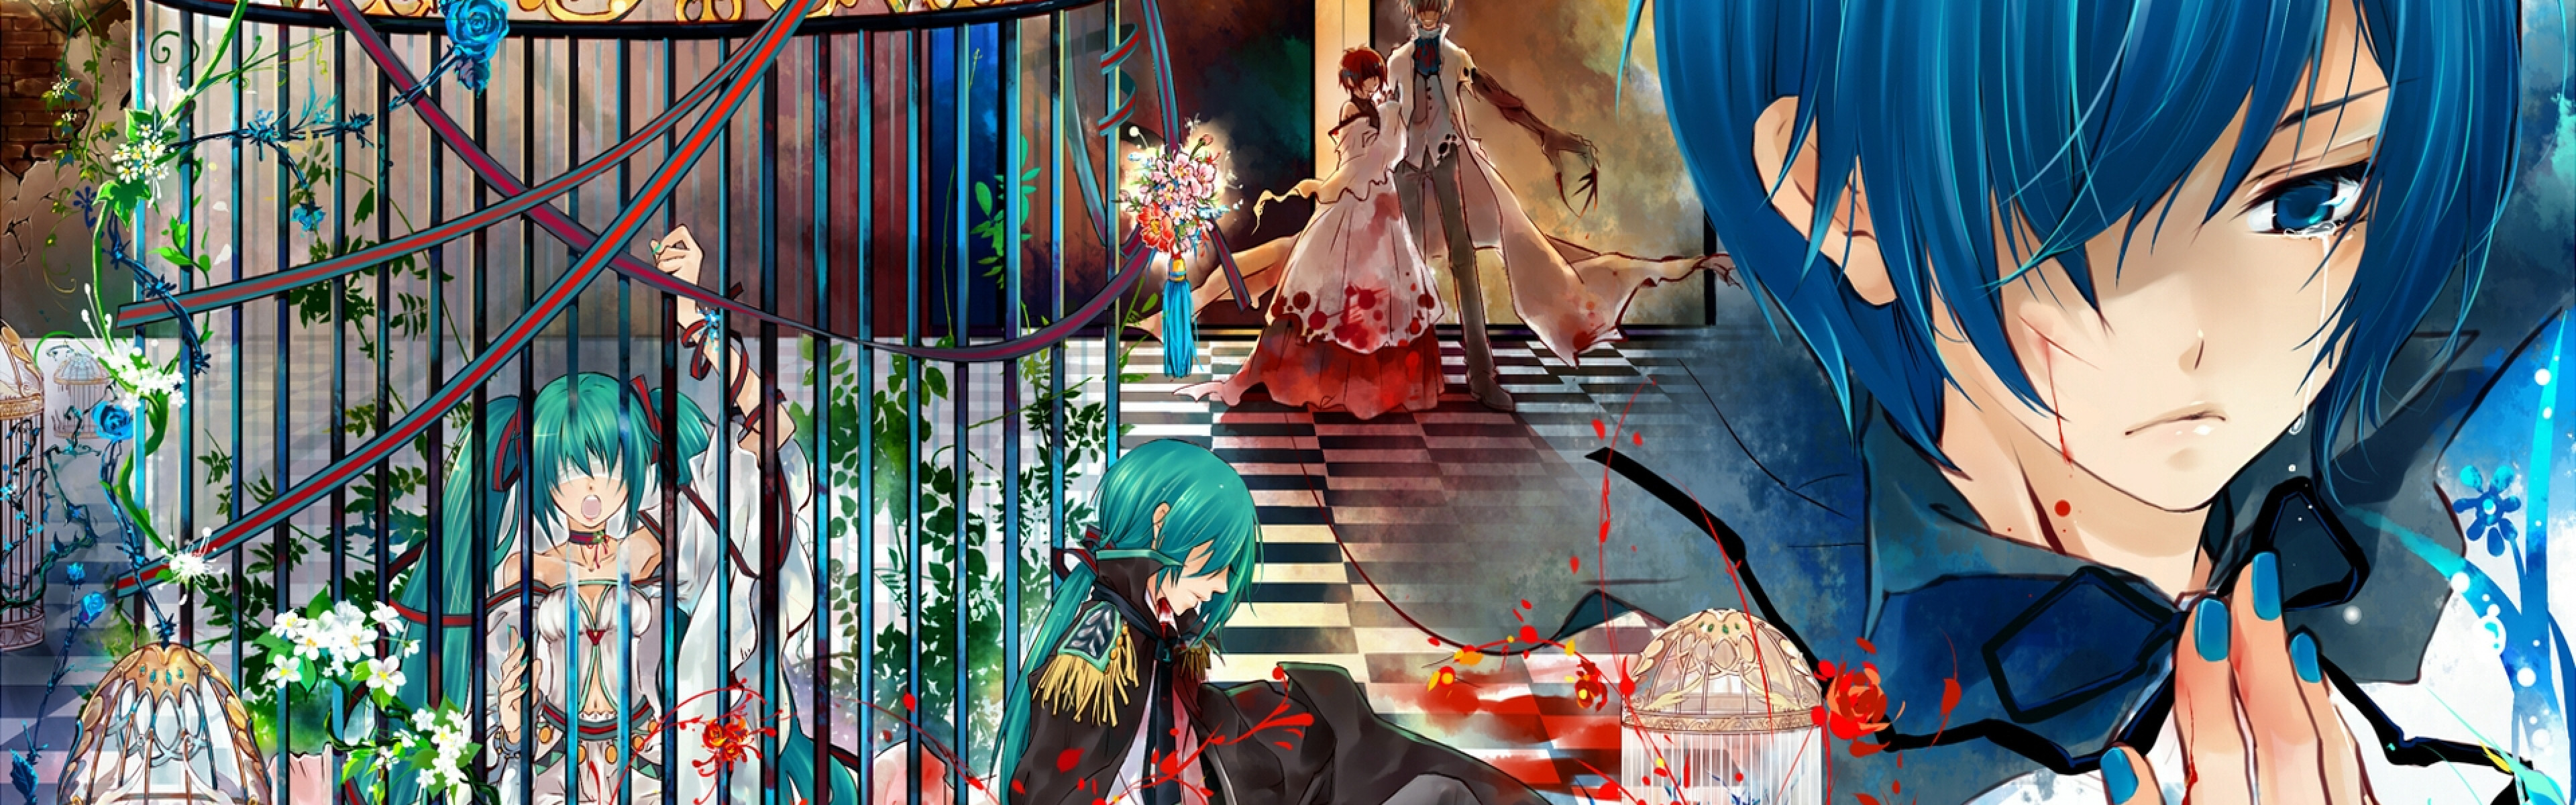 3840x1200  Wallpaper vocaloid, kaito, tears, cell, blood